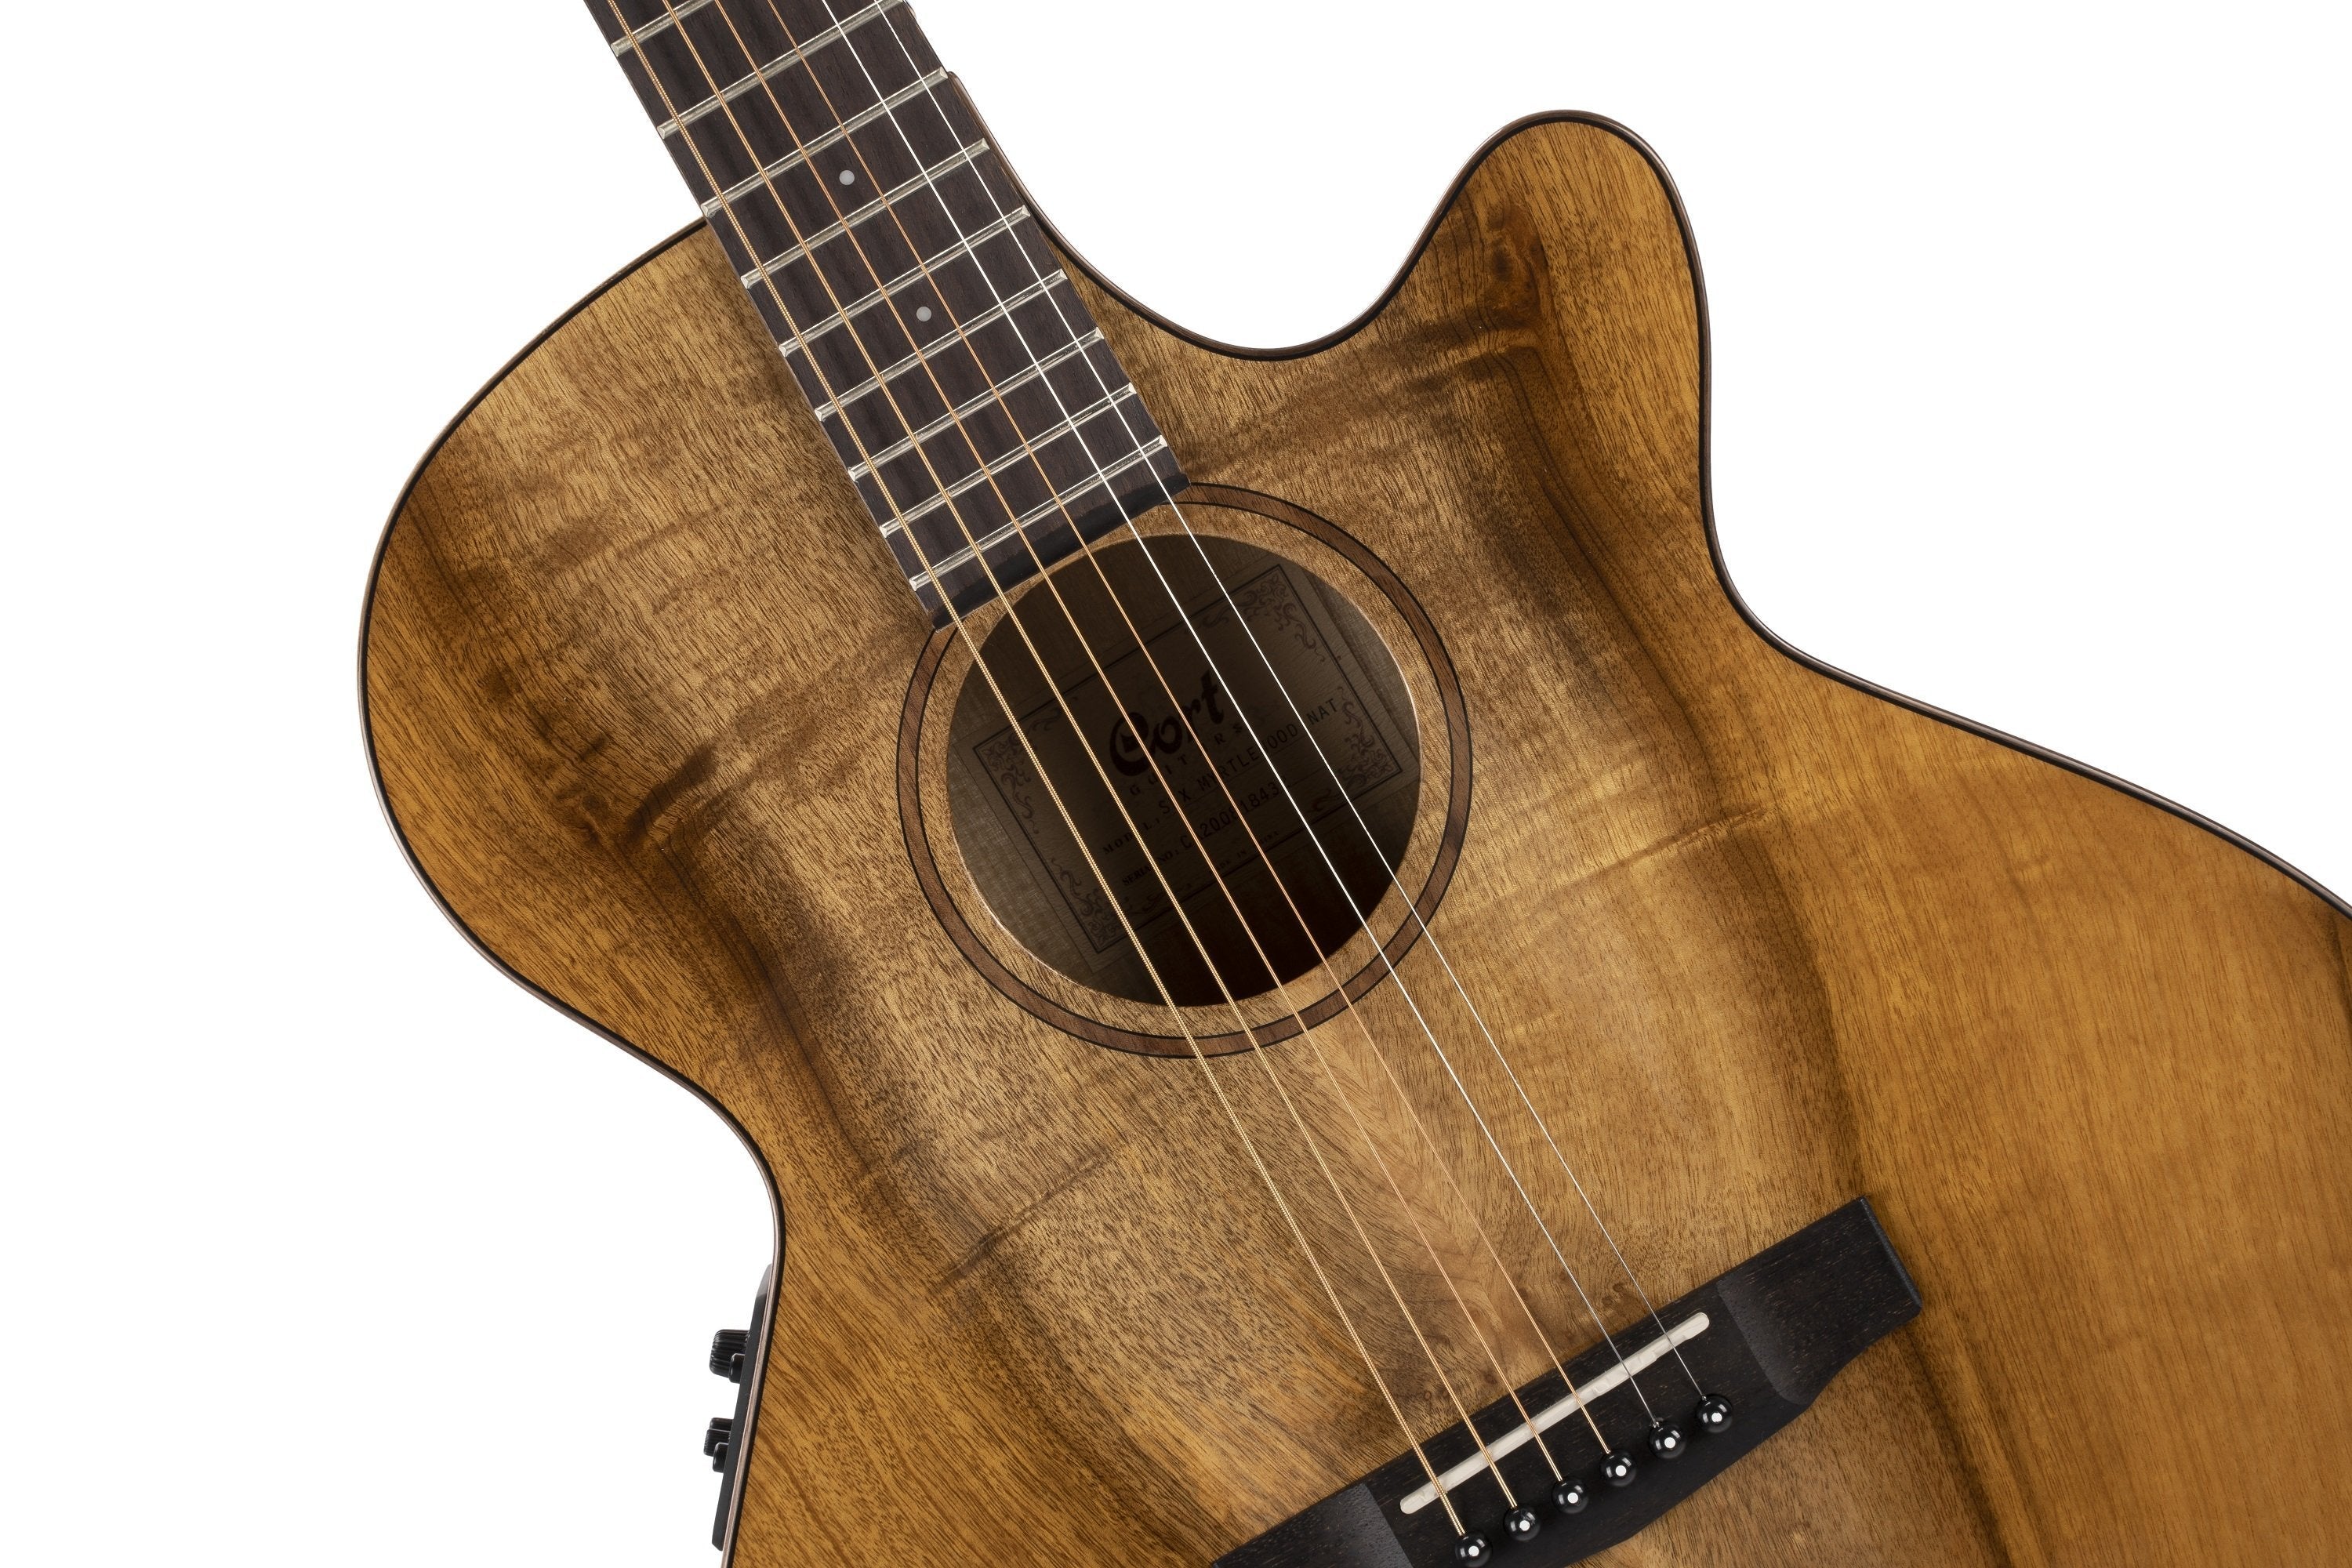 Cort SFX All Myrtlewood Natural Gloss, Electro Acoustic Guitar for sale at Richards Guitars.